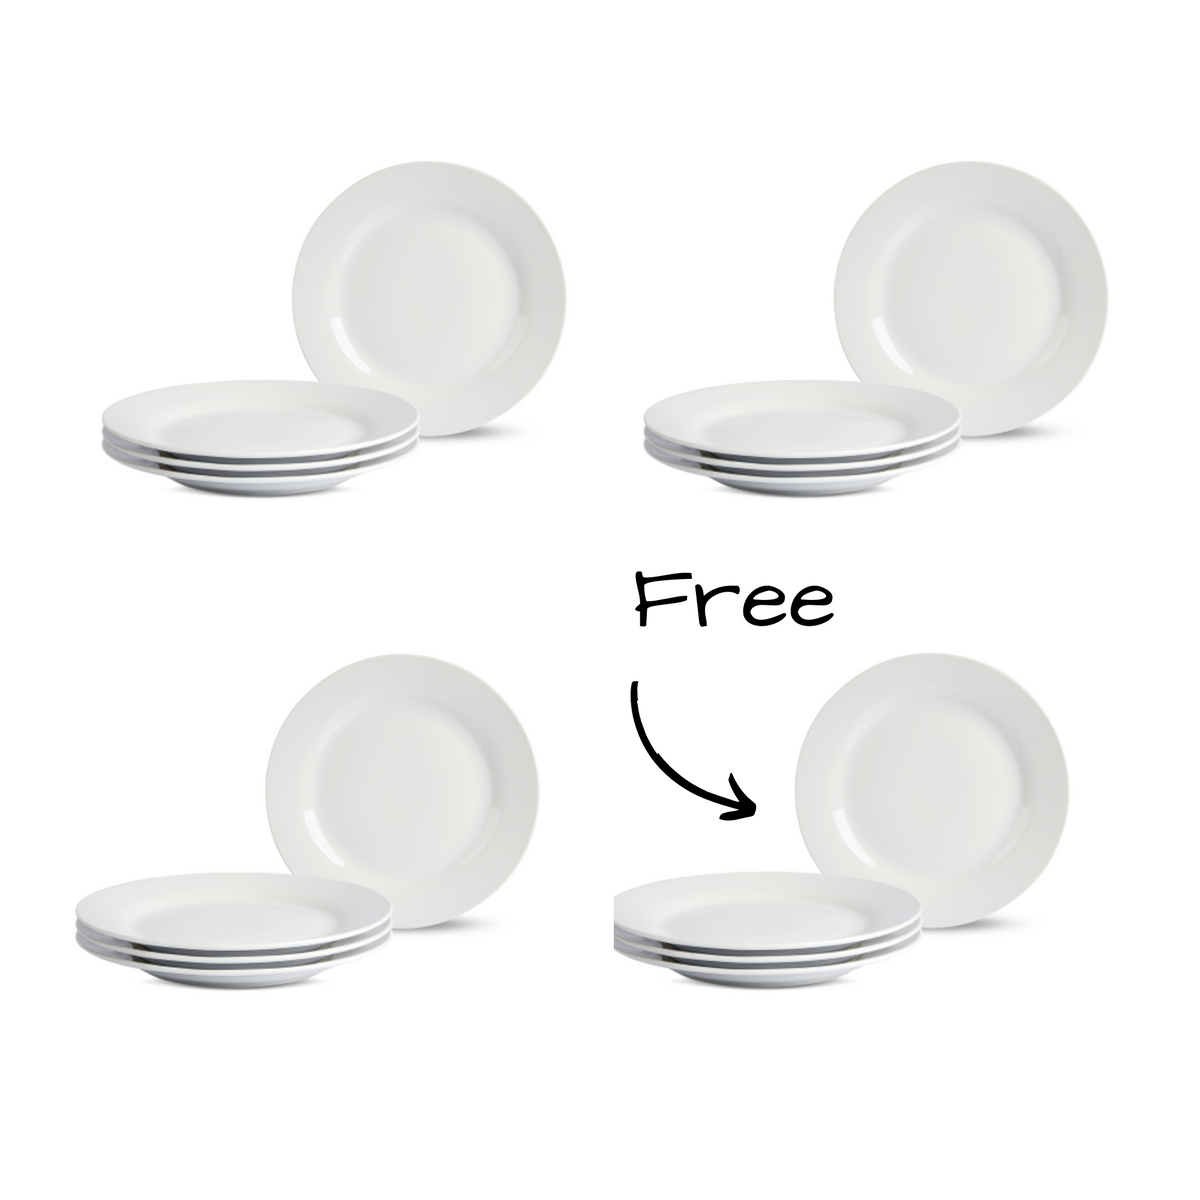 Buy 12 get 4 free! Front view, 4 sets of stacked salad plates and upright plates arranged in a square.